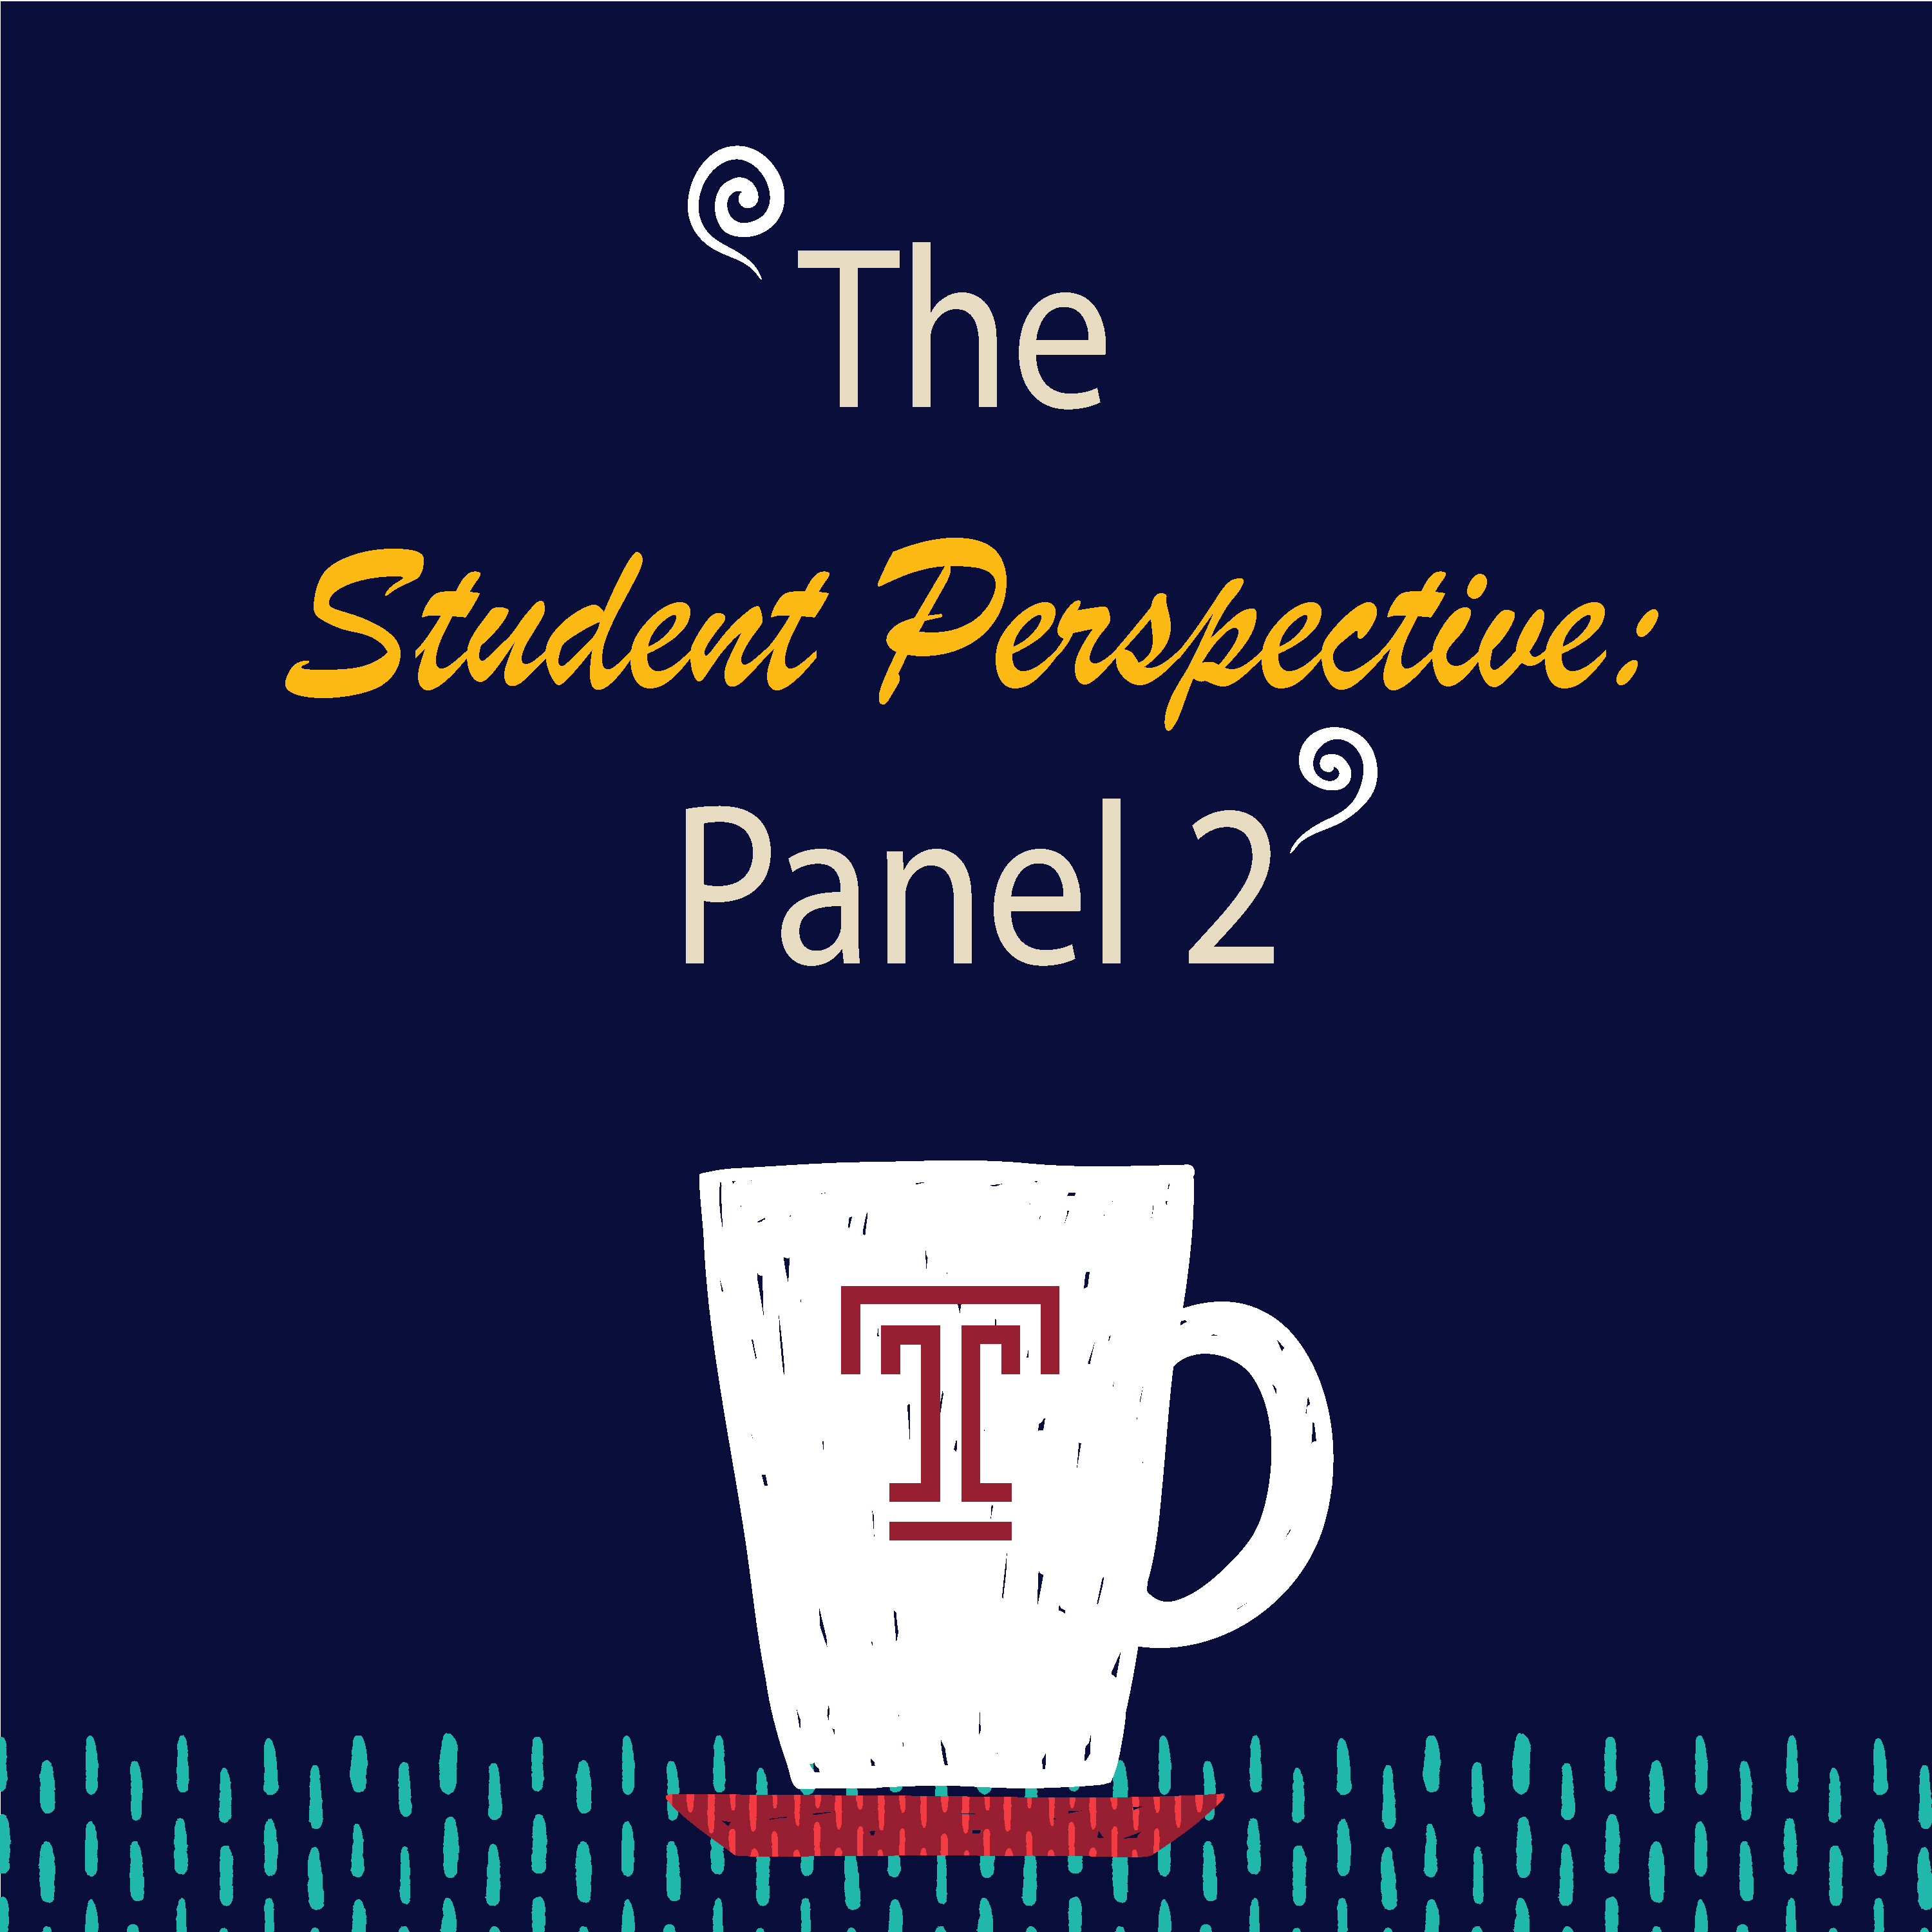 The Student Perspective: Panel 2